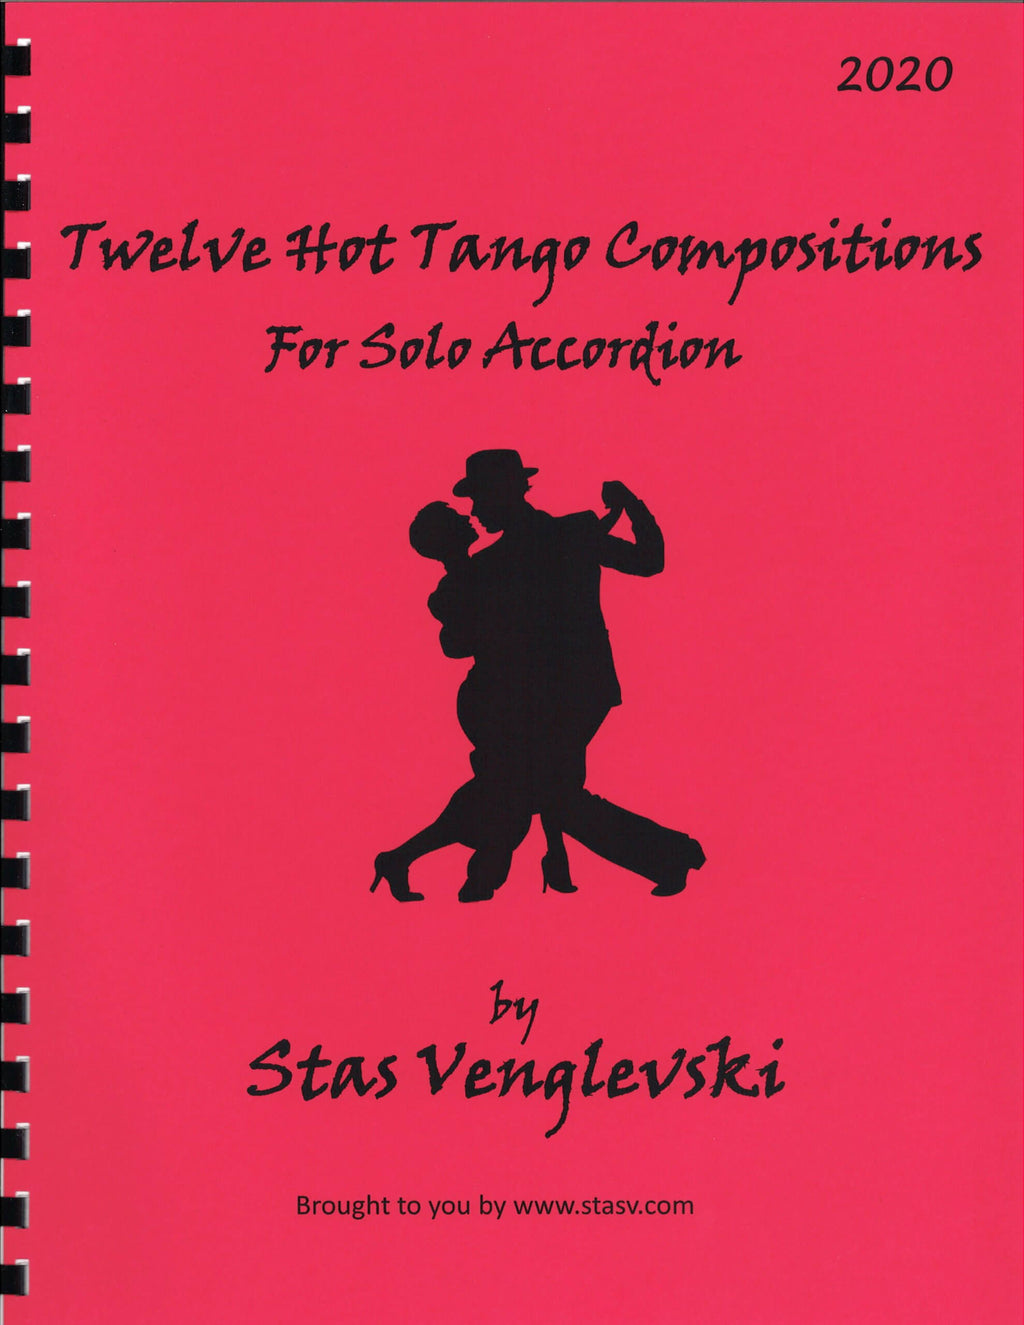 Twelve Hot Tango Compositions for Solo Accordion by Stas Venglevski